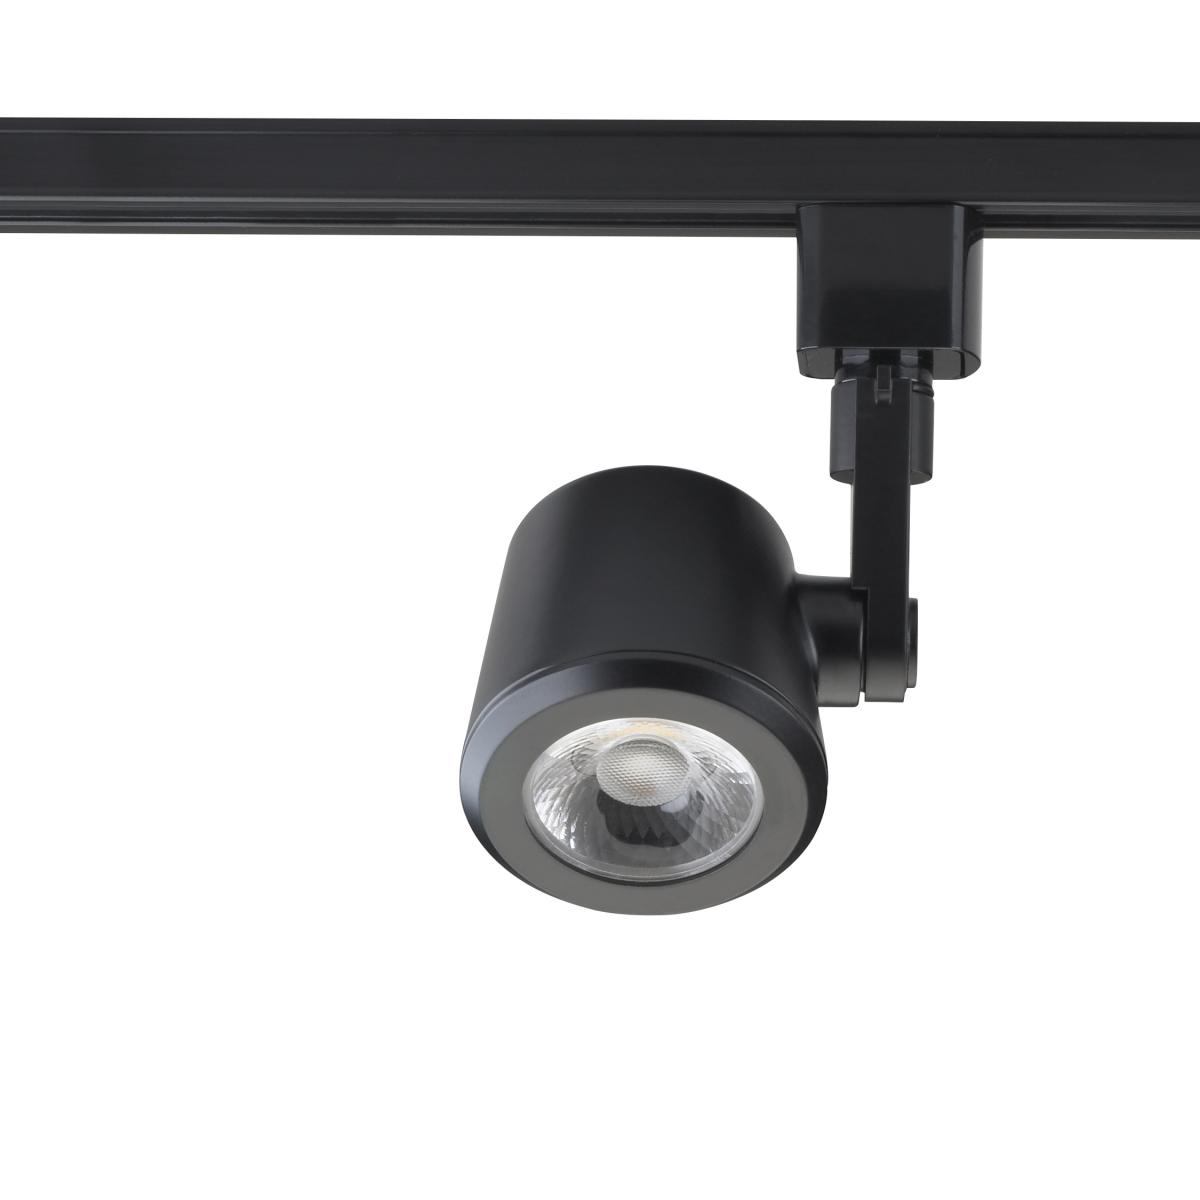 Taper Back Style LED Track Head Only  - Black Finish - 36 Degree Beam - 1020 Lumens - 3000K Soft White - 12 Watt - Dimmable - 3 Contact Halo Style